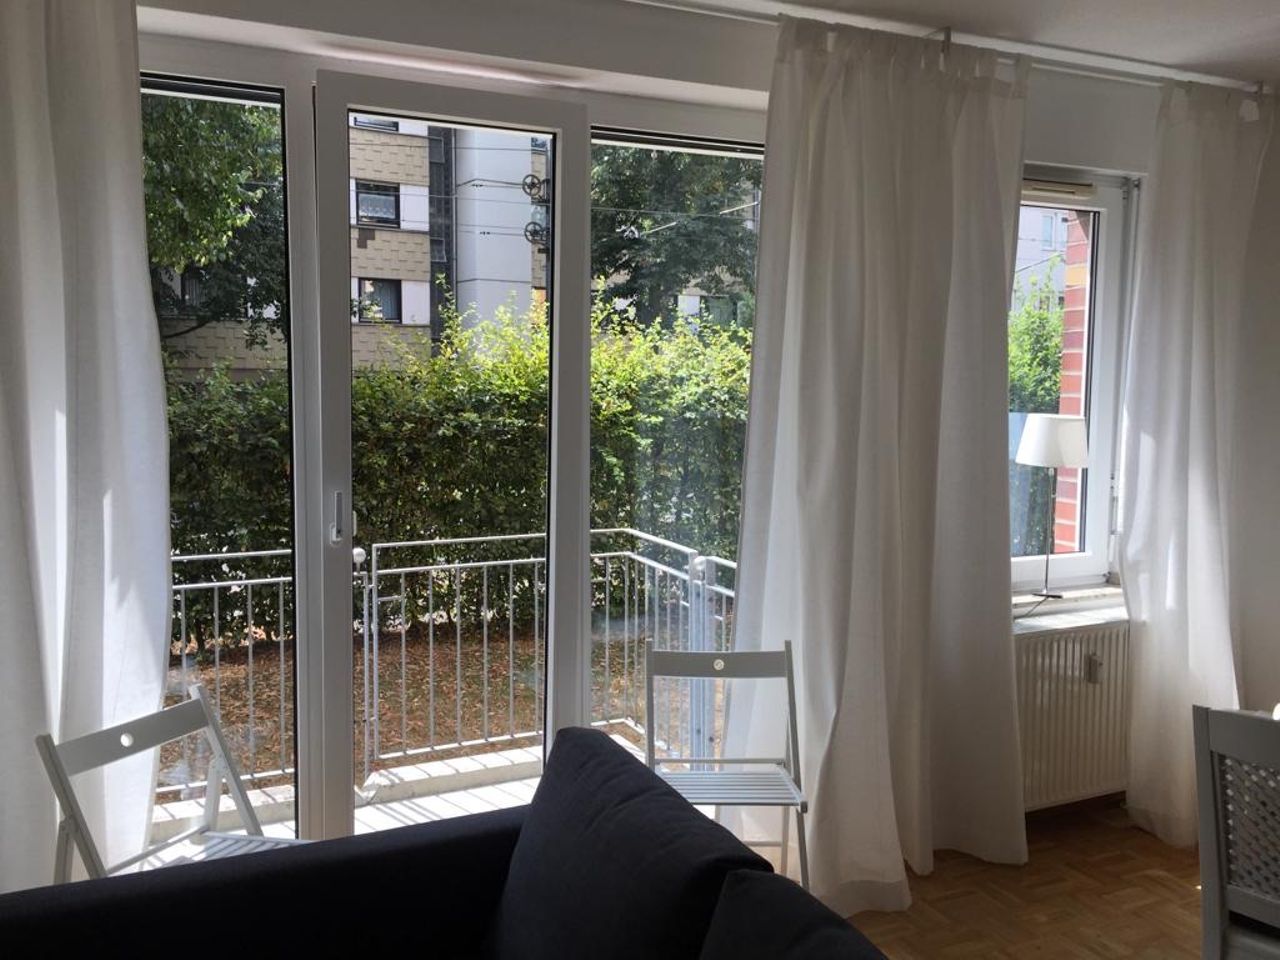 Awesome, amazing studio in Düsseldorf only 150m to the rhine with balkony and parking